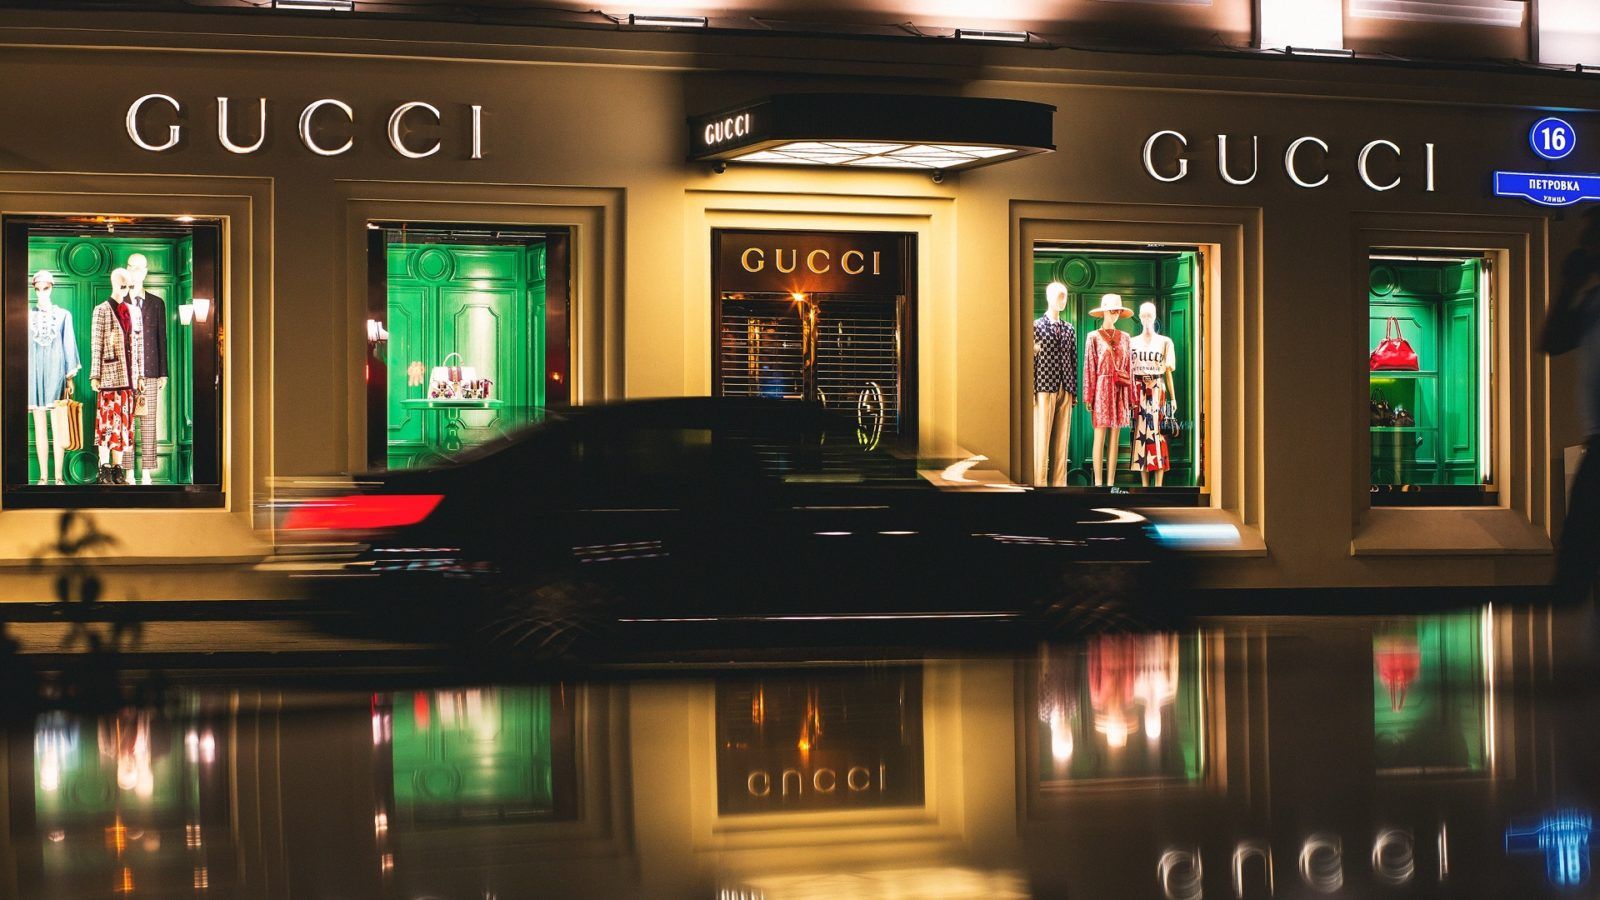 Know the history of the luxury fashion brand before you watch ‘House of Gucci’